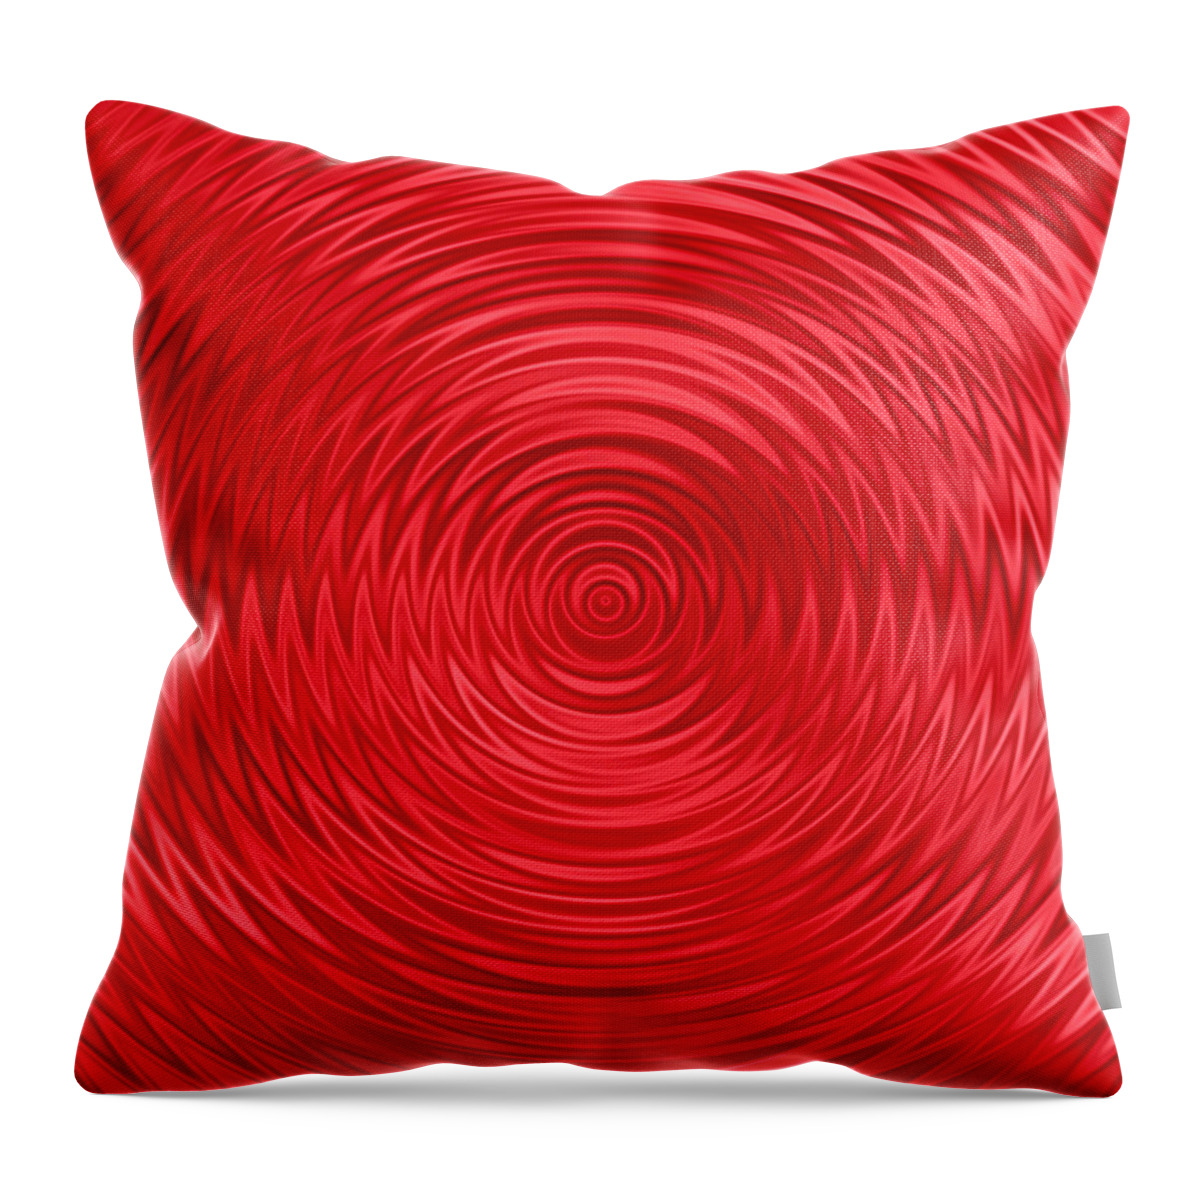 Abstract Throw Pillow featuring the digital art Wavy Red Background by Valentino Visentini